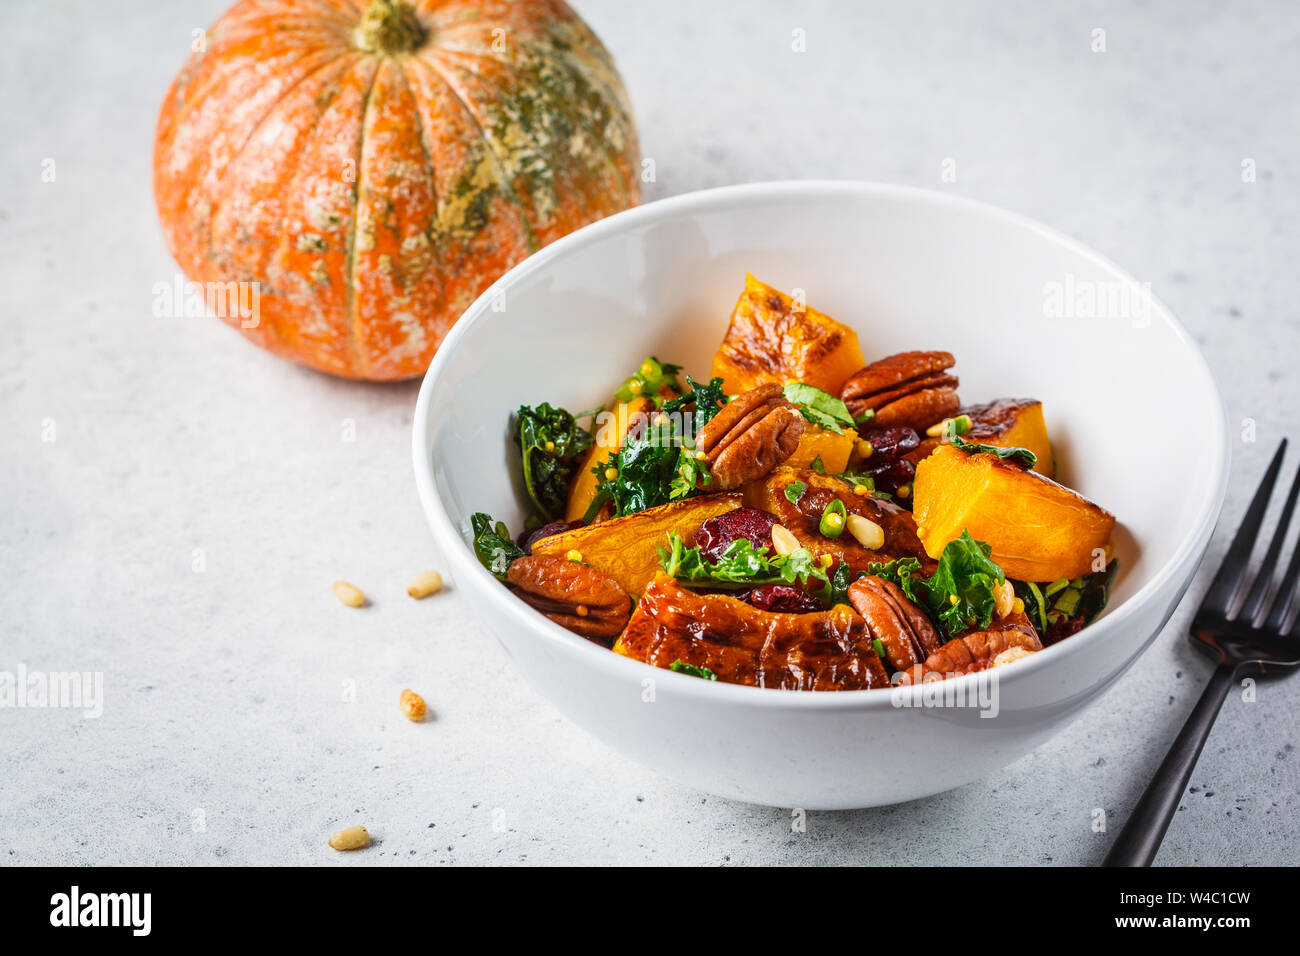 Pumpkin salad with nuts, cranberries and kale in white bowl. Stock Photo